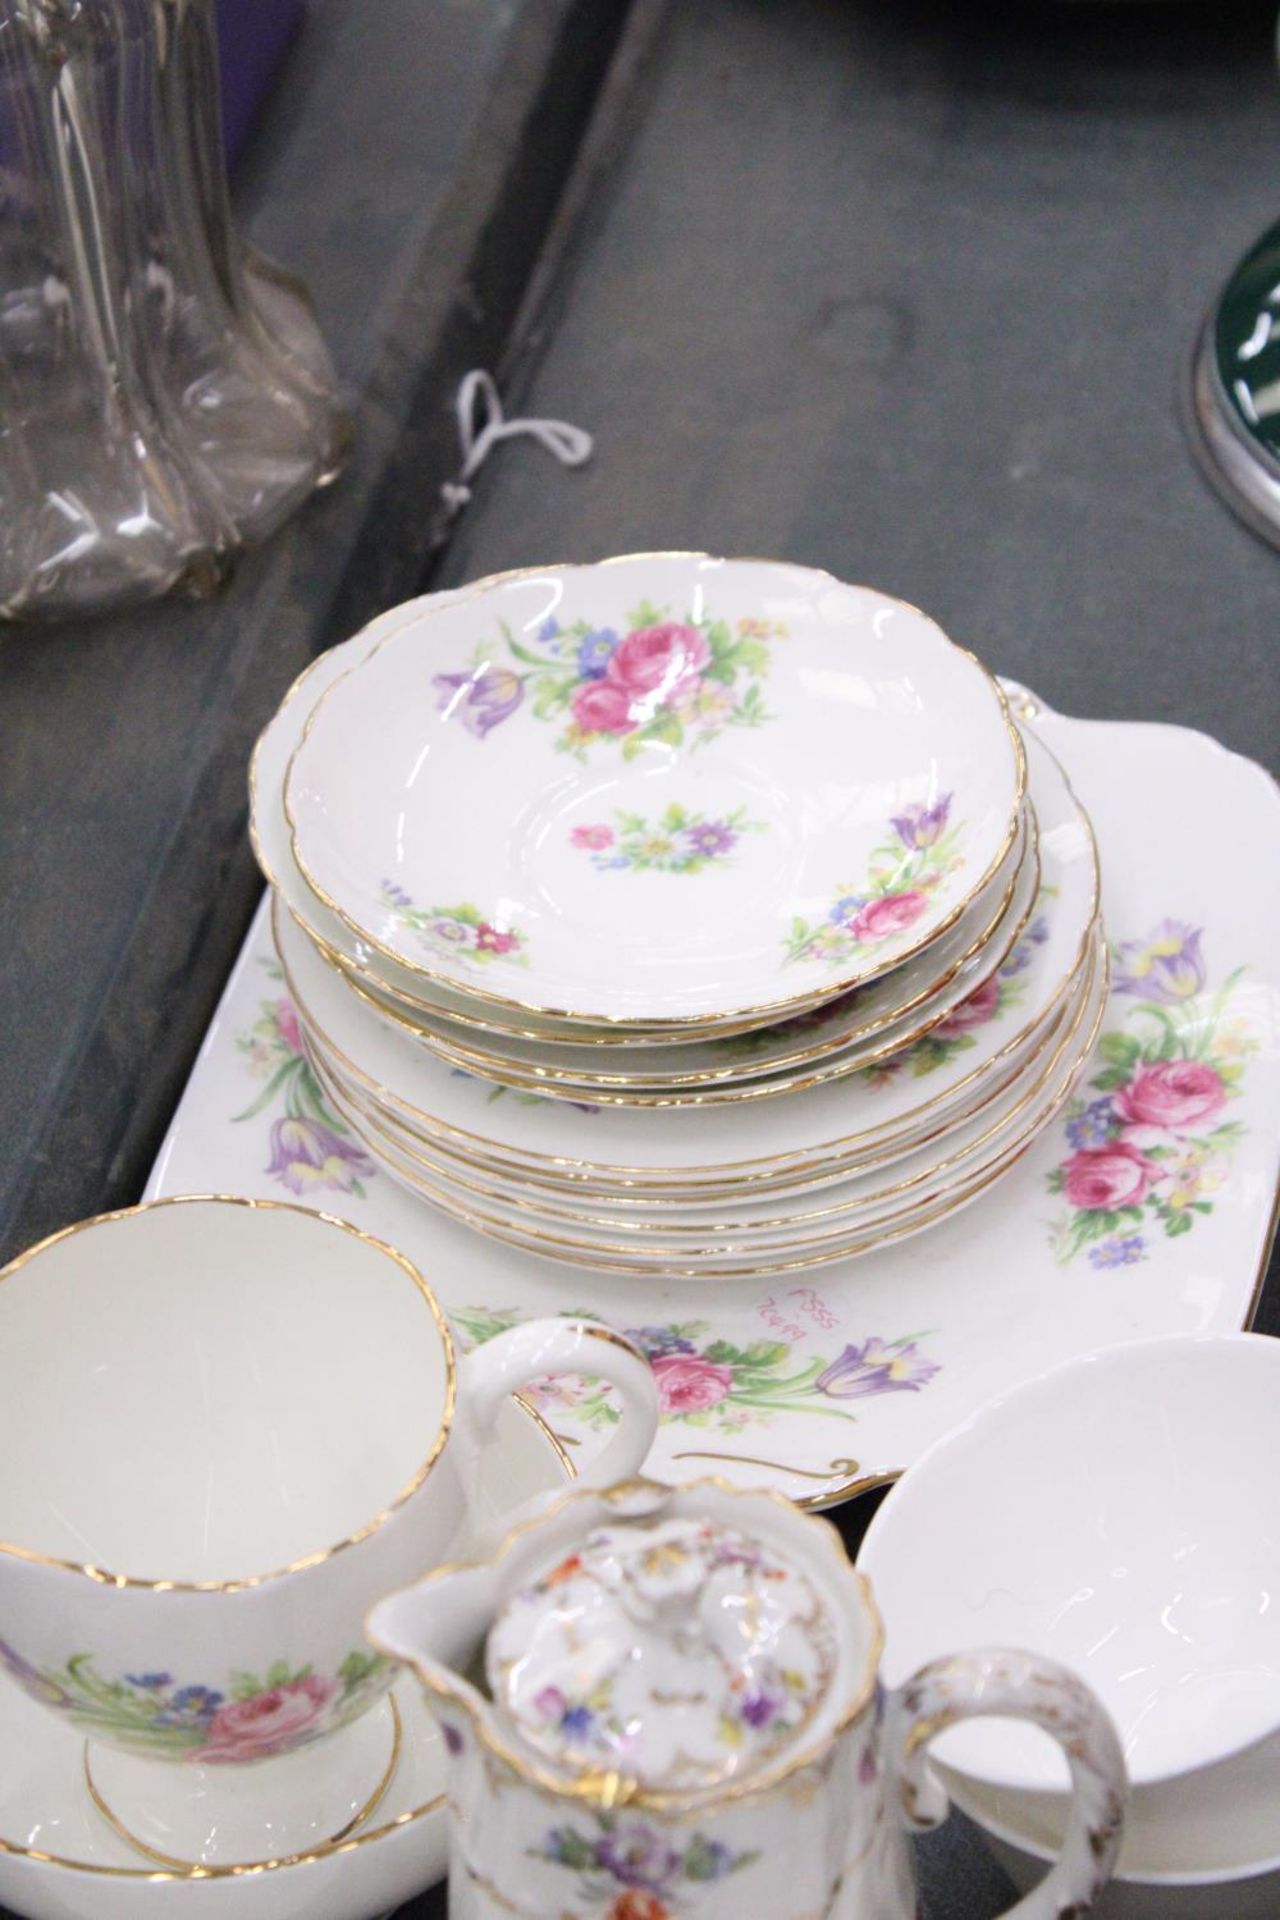 A FOLEY CHINA PART TEASET TO INCLUDE A CAKE PLATE, A CREAM JUG, SUGAR BOWL, CUPS, SAUCERS AND SIDE - Image 2 of 6